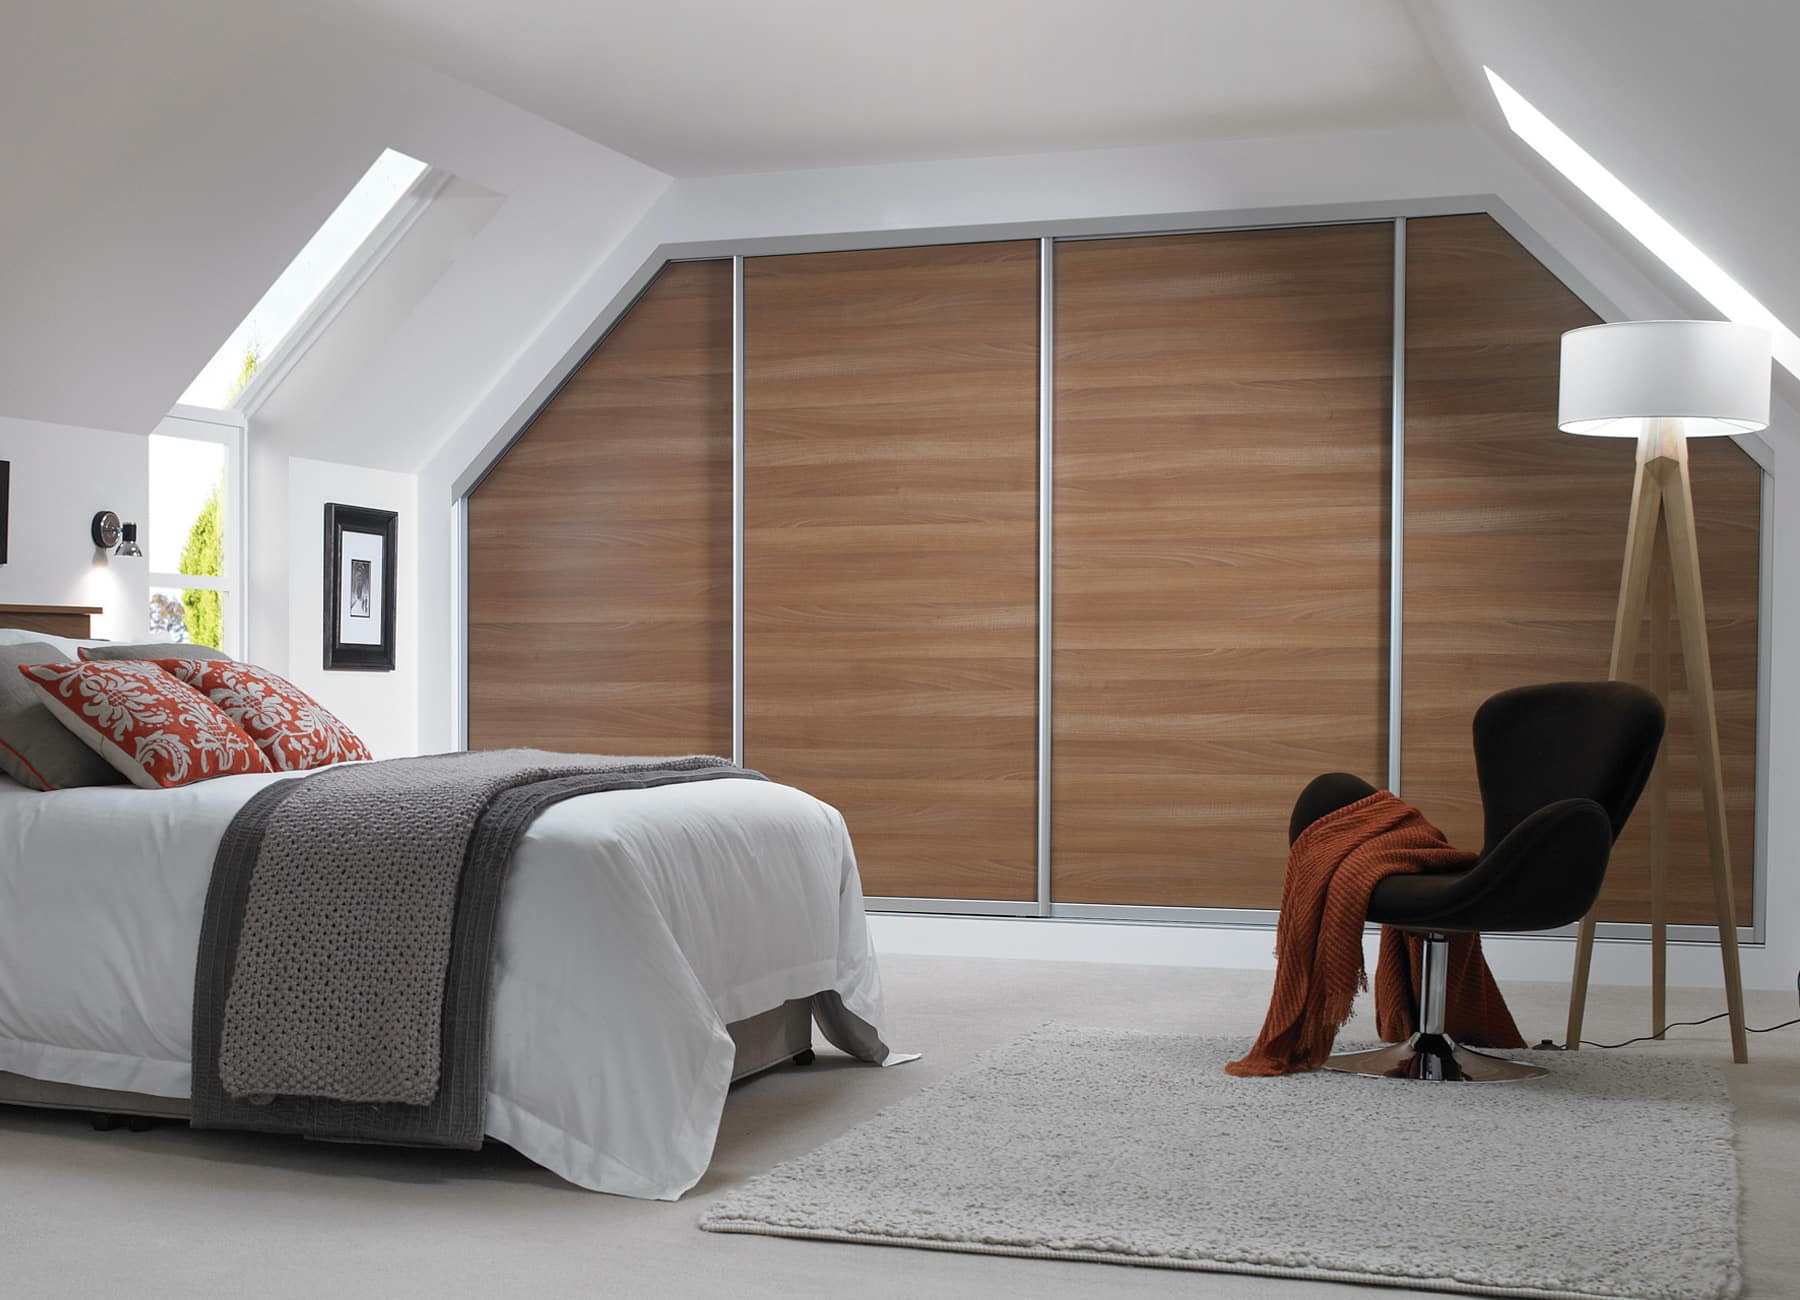 Clever fitted wardrobe solutions for awkward spaces - My Fitted Bedroom